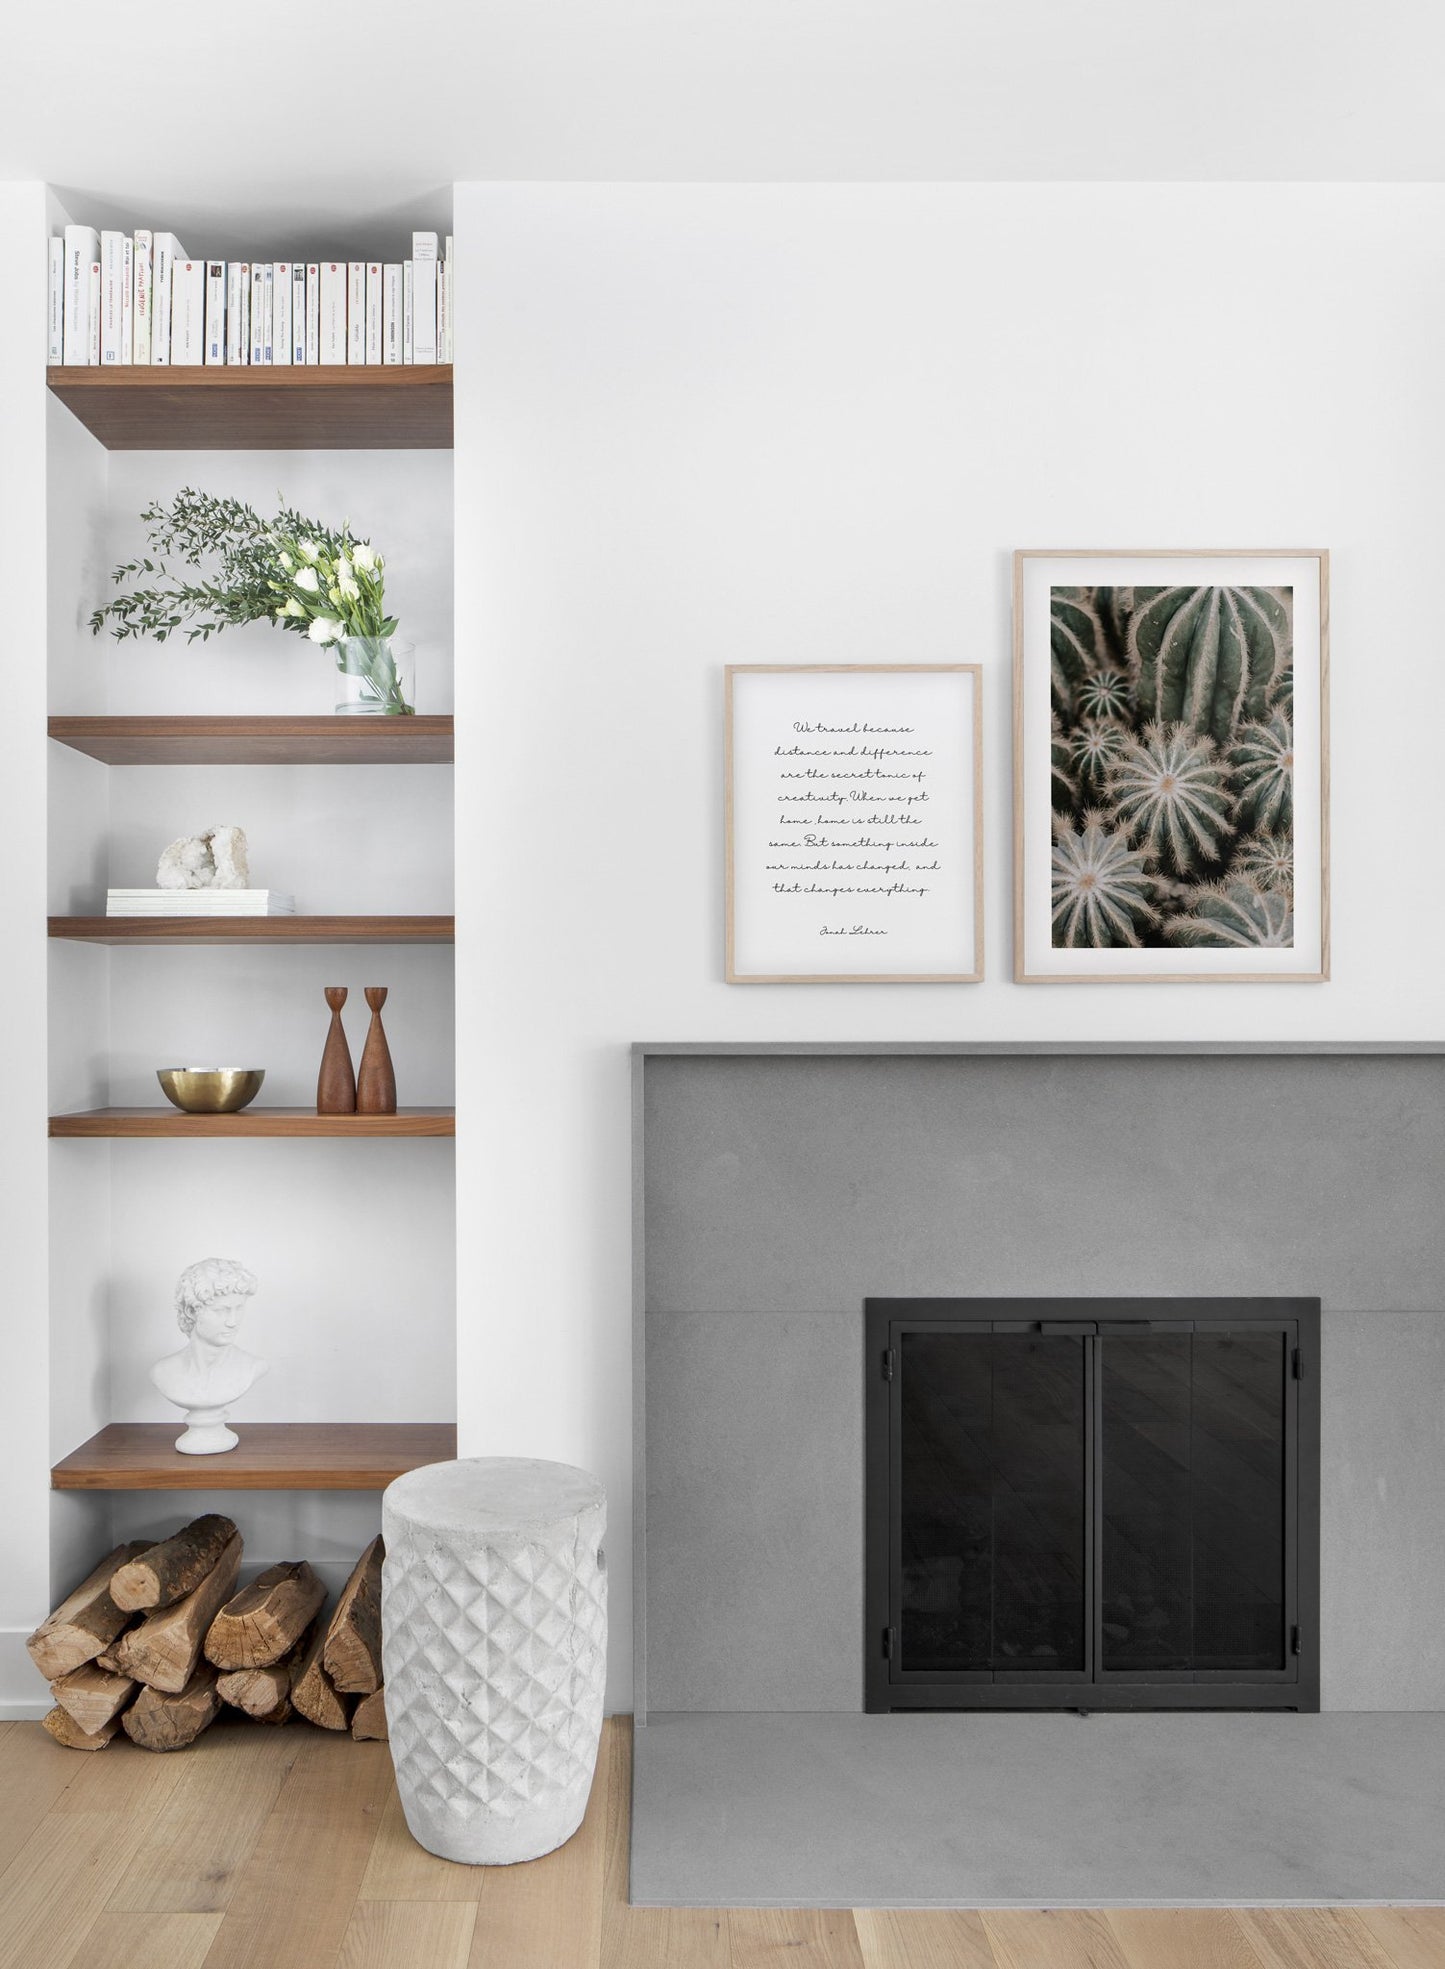 Cacti modern minimalist botanical photography poster by Opposite Wall - Living room with gallery Wall duo